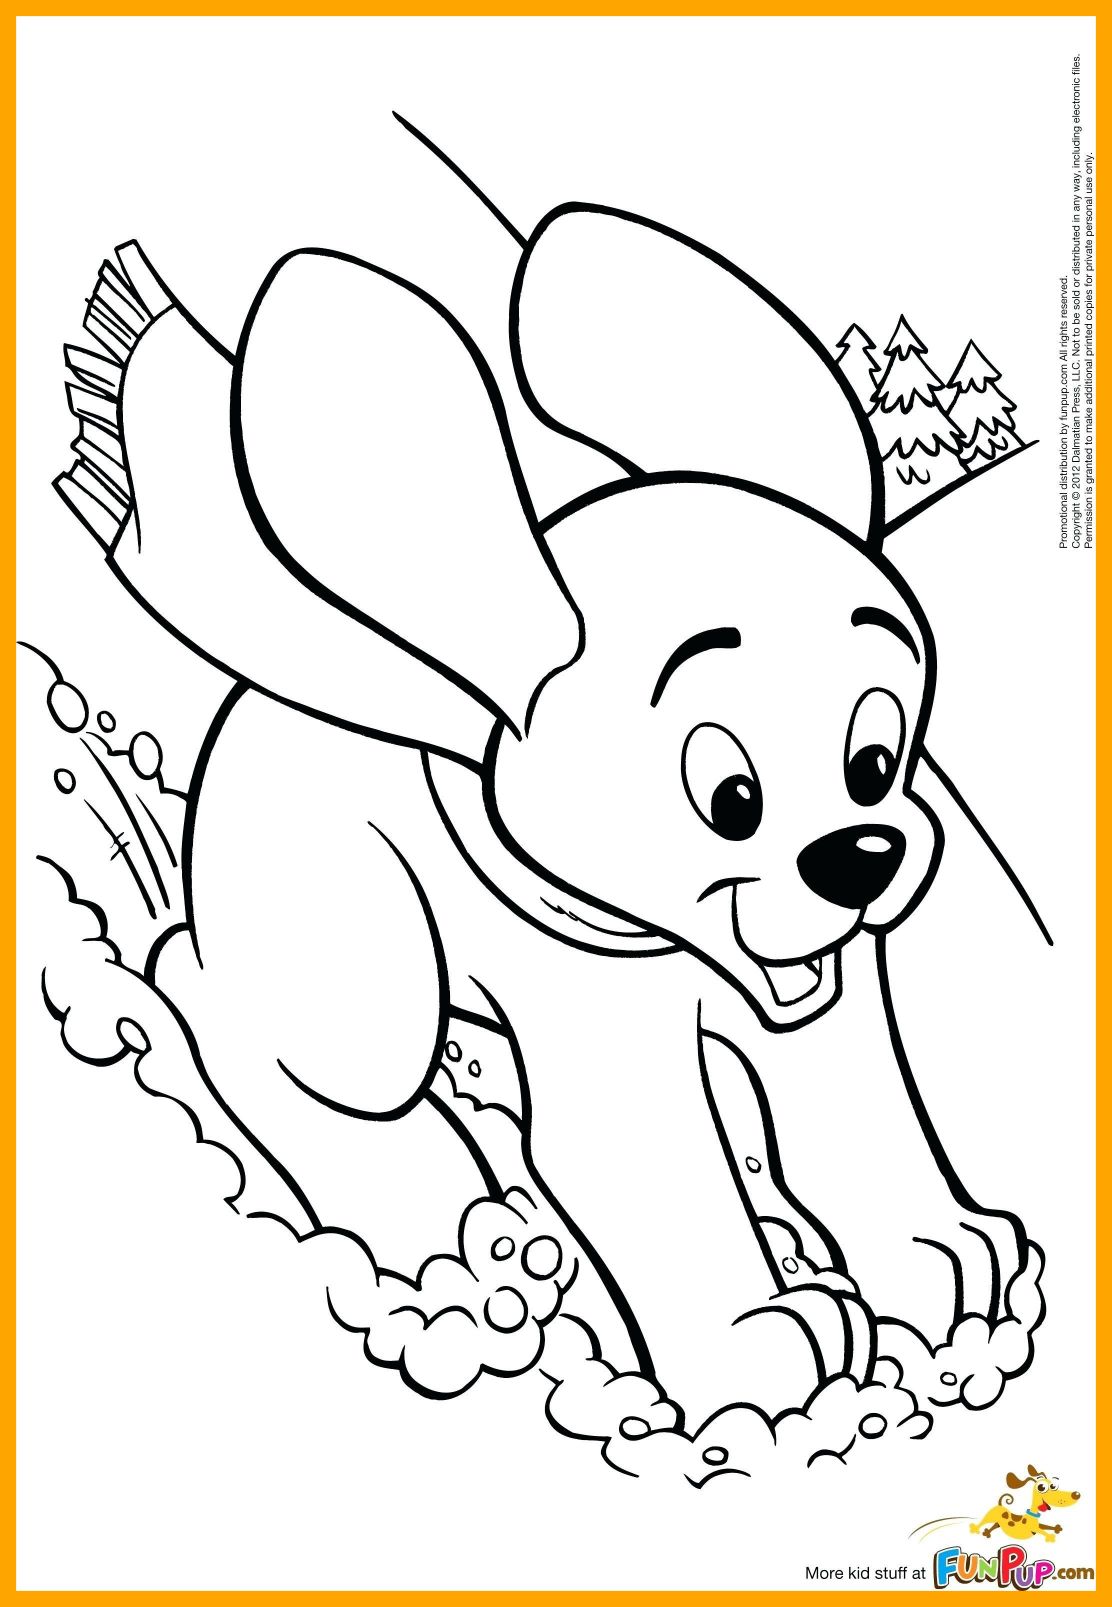 Golden Retriever Puppy Coloring Pages at GetDrawings | Free download